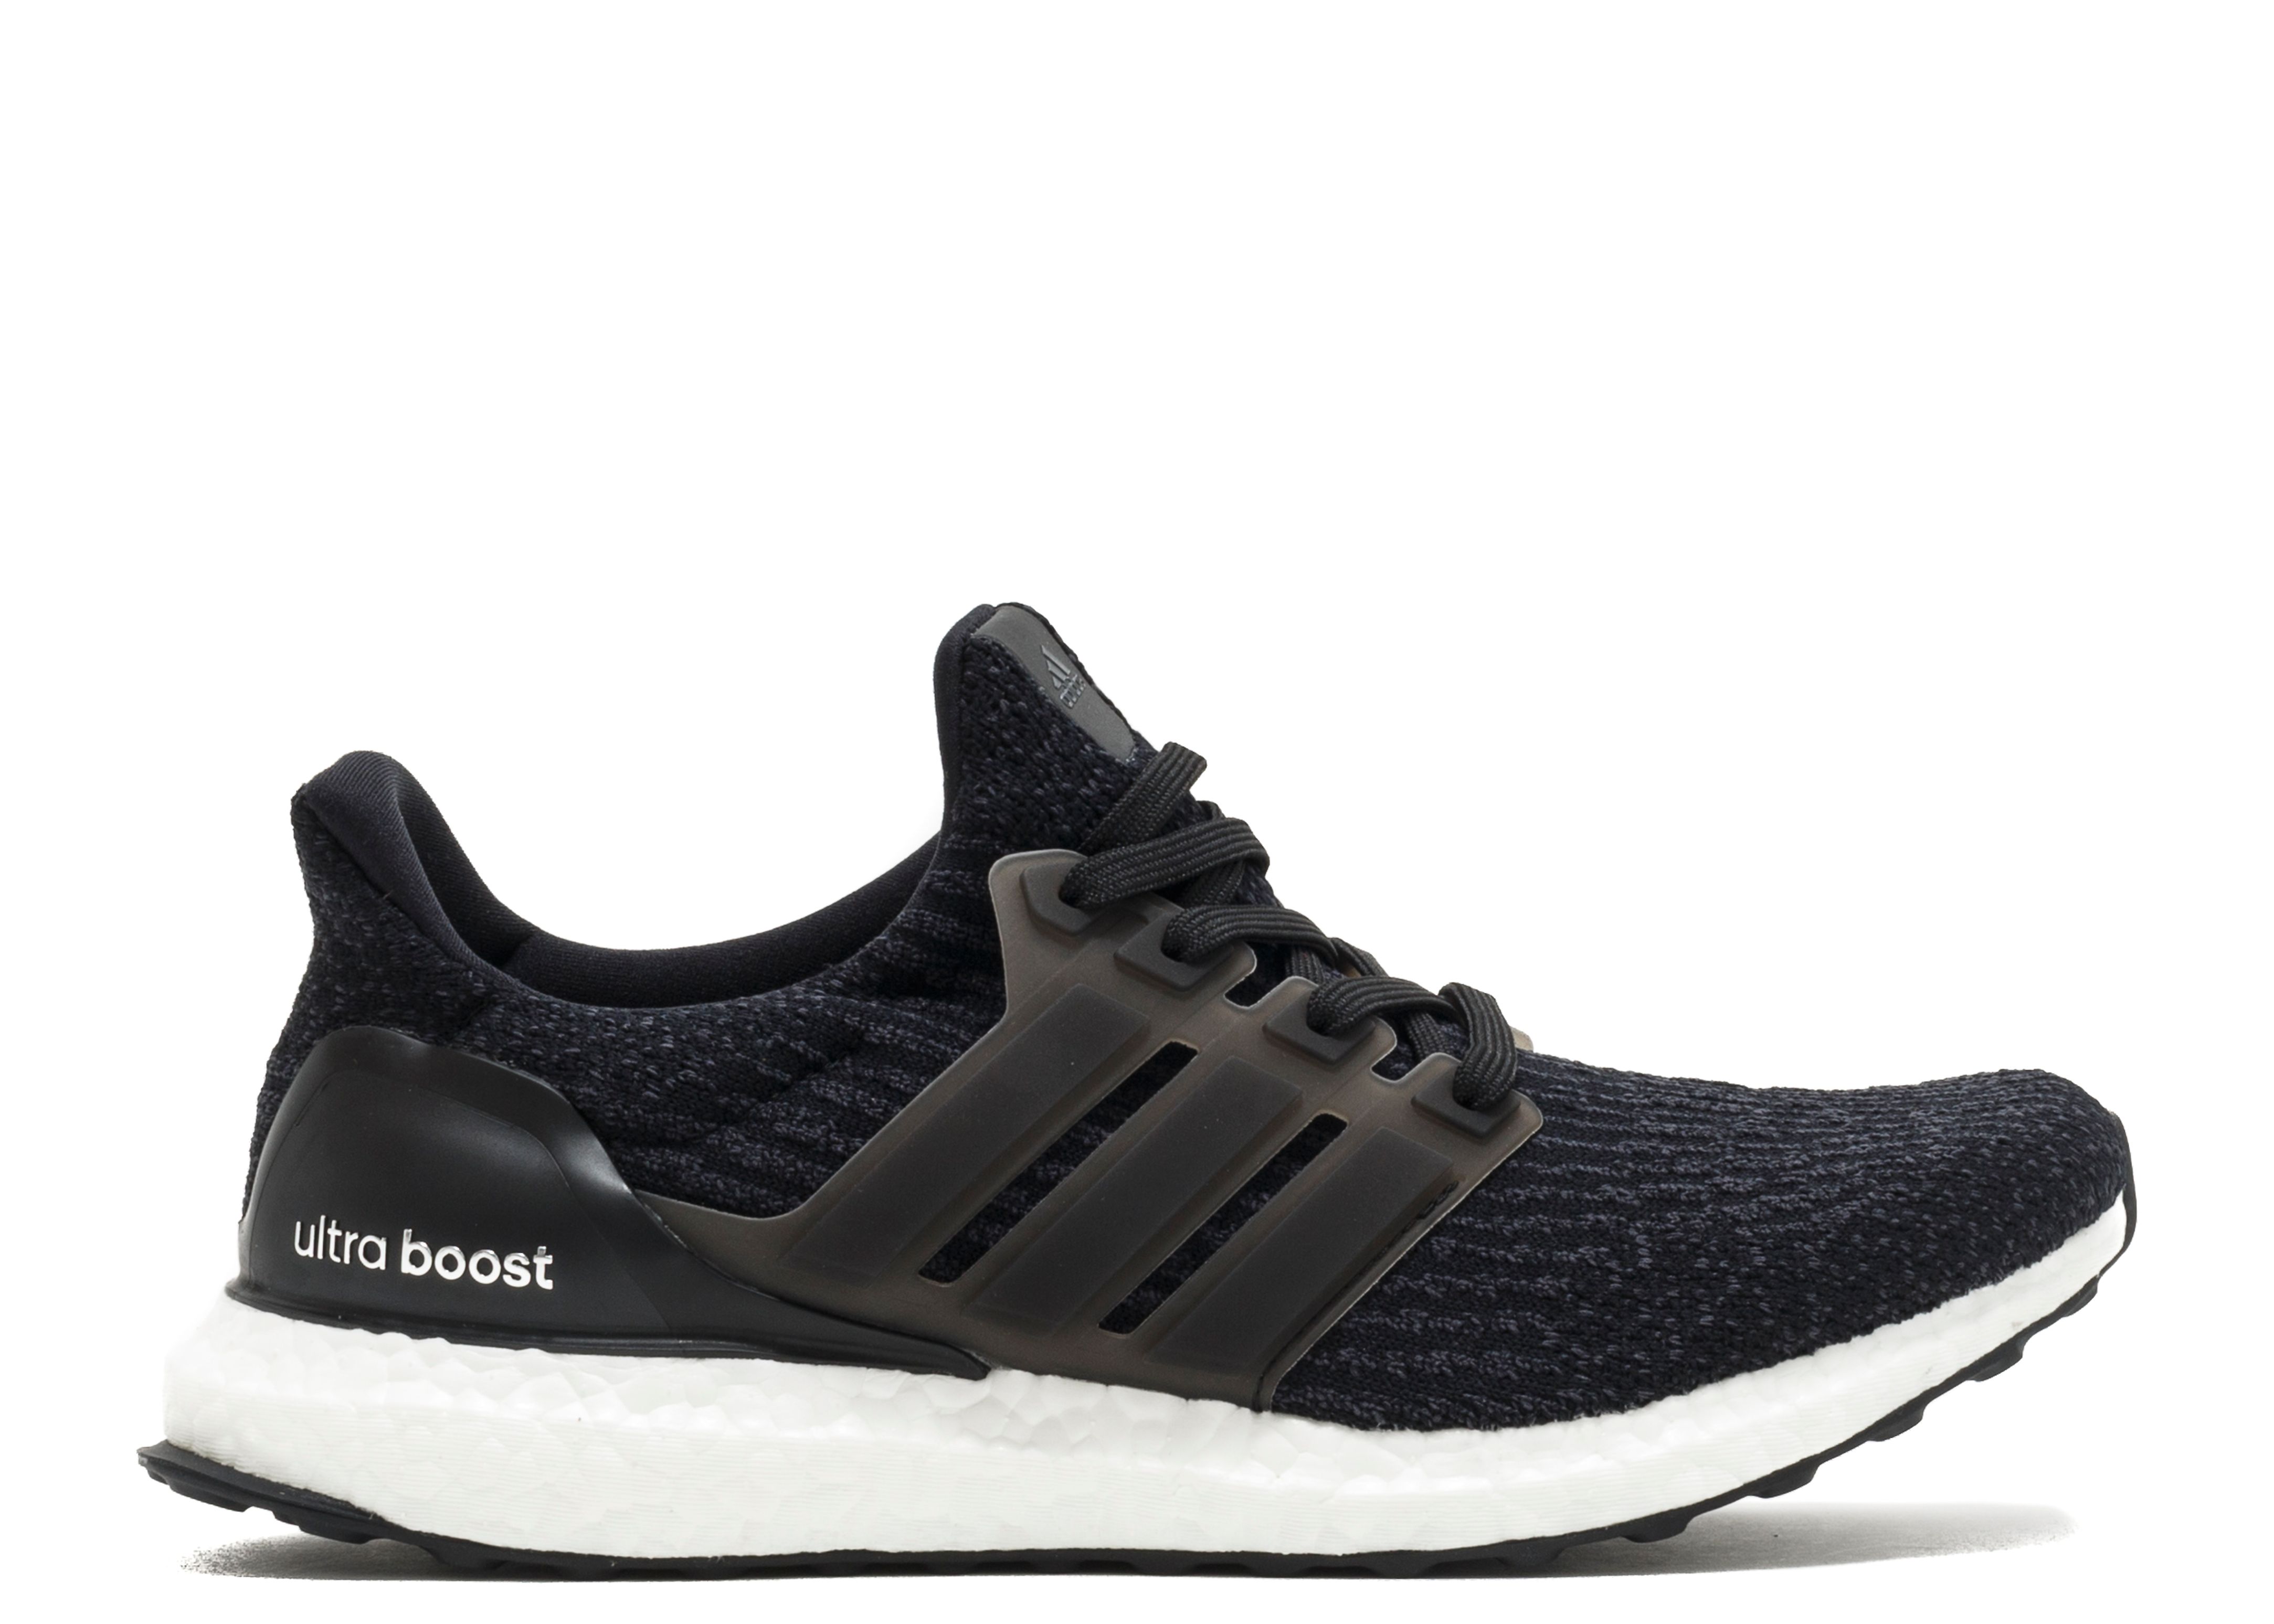 The Cheap Adidas Ultra Boost 3.0 LGBT Shoes OUTLOOK OHIO 